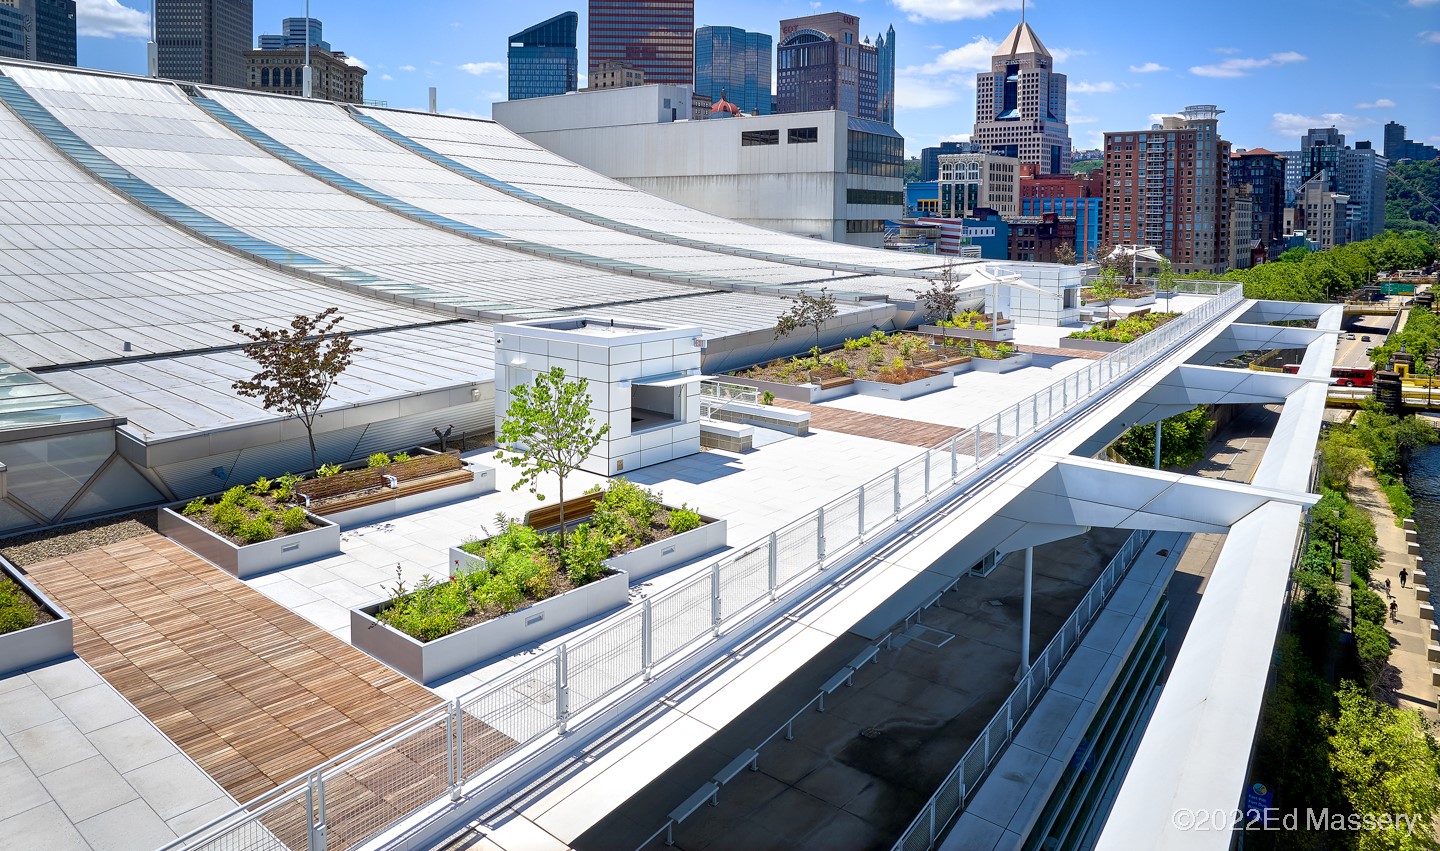 Vegetated Roofs & Amenity Solutions